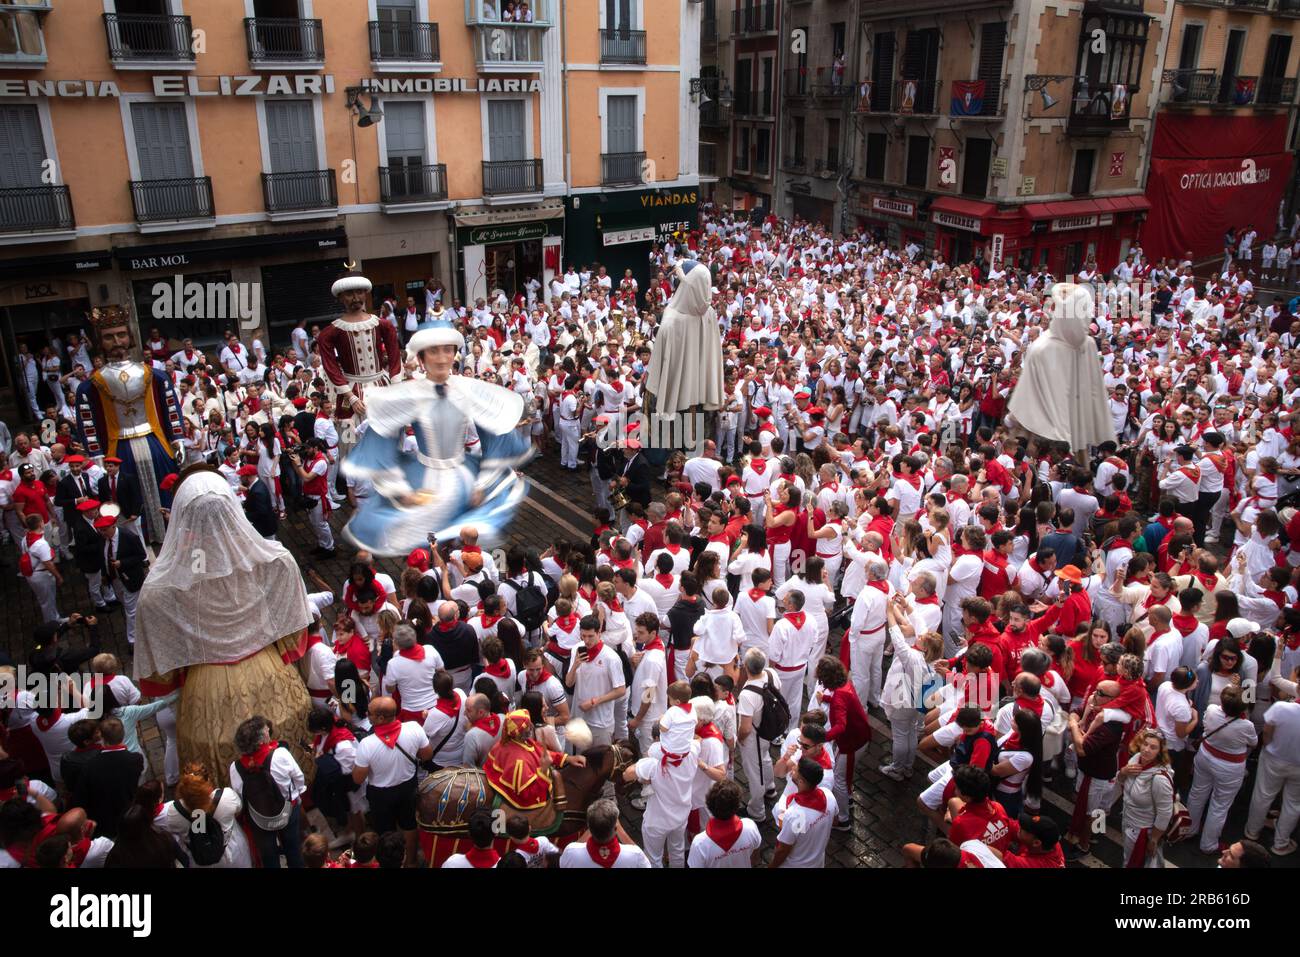 Pamplona, Spain. 07th July, 2023. Dance of the giants seen at the Plaza del Ayuntamiento in Pamplona on the second day of Sanfermines 2023. Thousands of people crowded together in the morning of Friday 7th July to see the dance of the traditional Sanfermines giants in Pamplona. (Photo by Ximena Borrazas/SOPA images/Sipa USA) Credit: Sipa USA/Alamy Live News Stock Photo